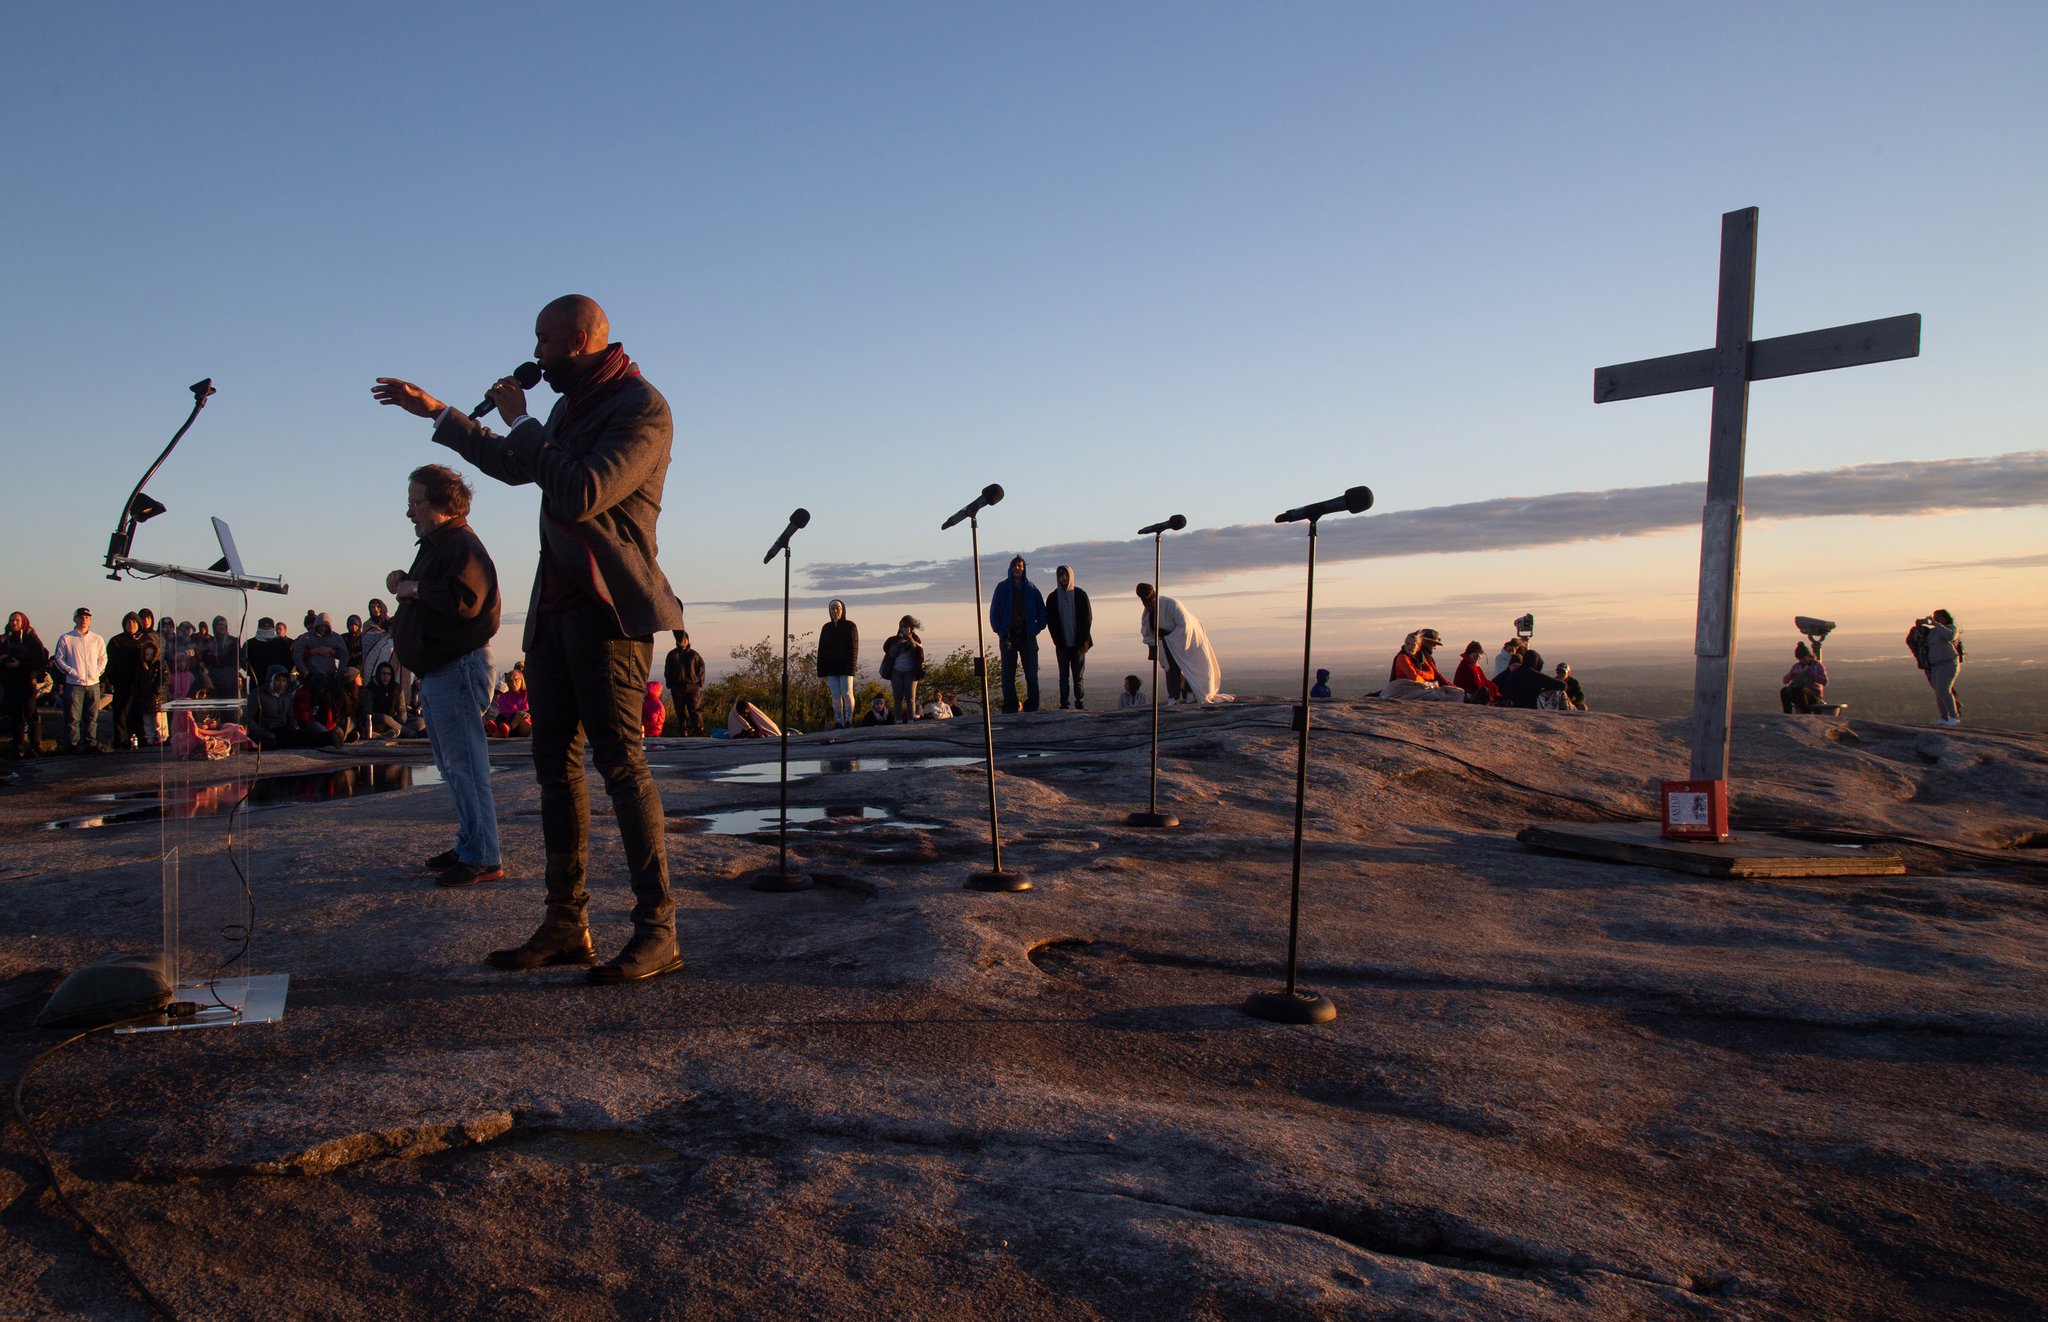 Easter Sunrise Service at Stone Mountain 2020 will not be held